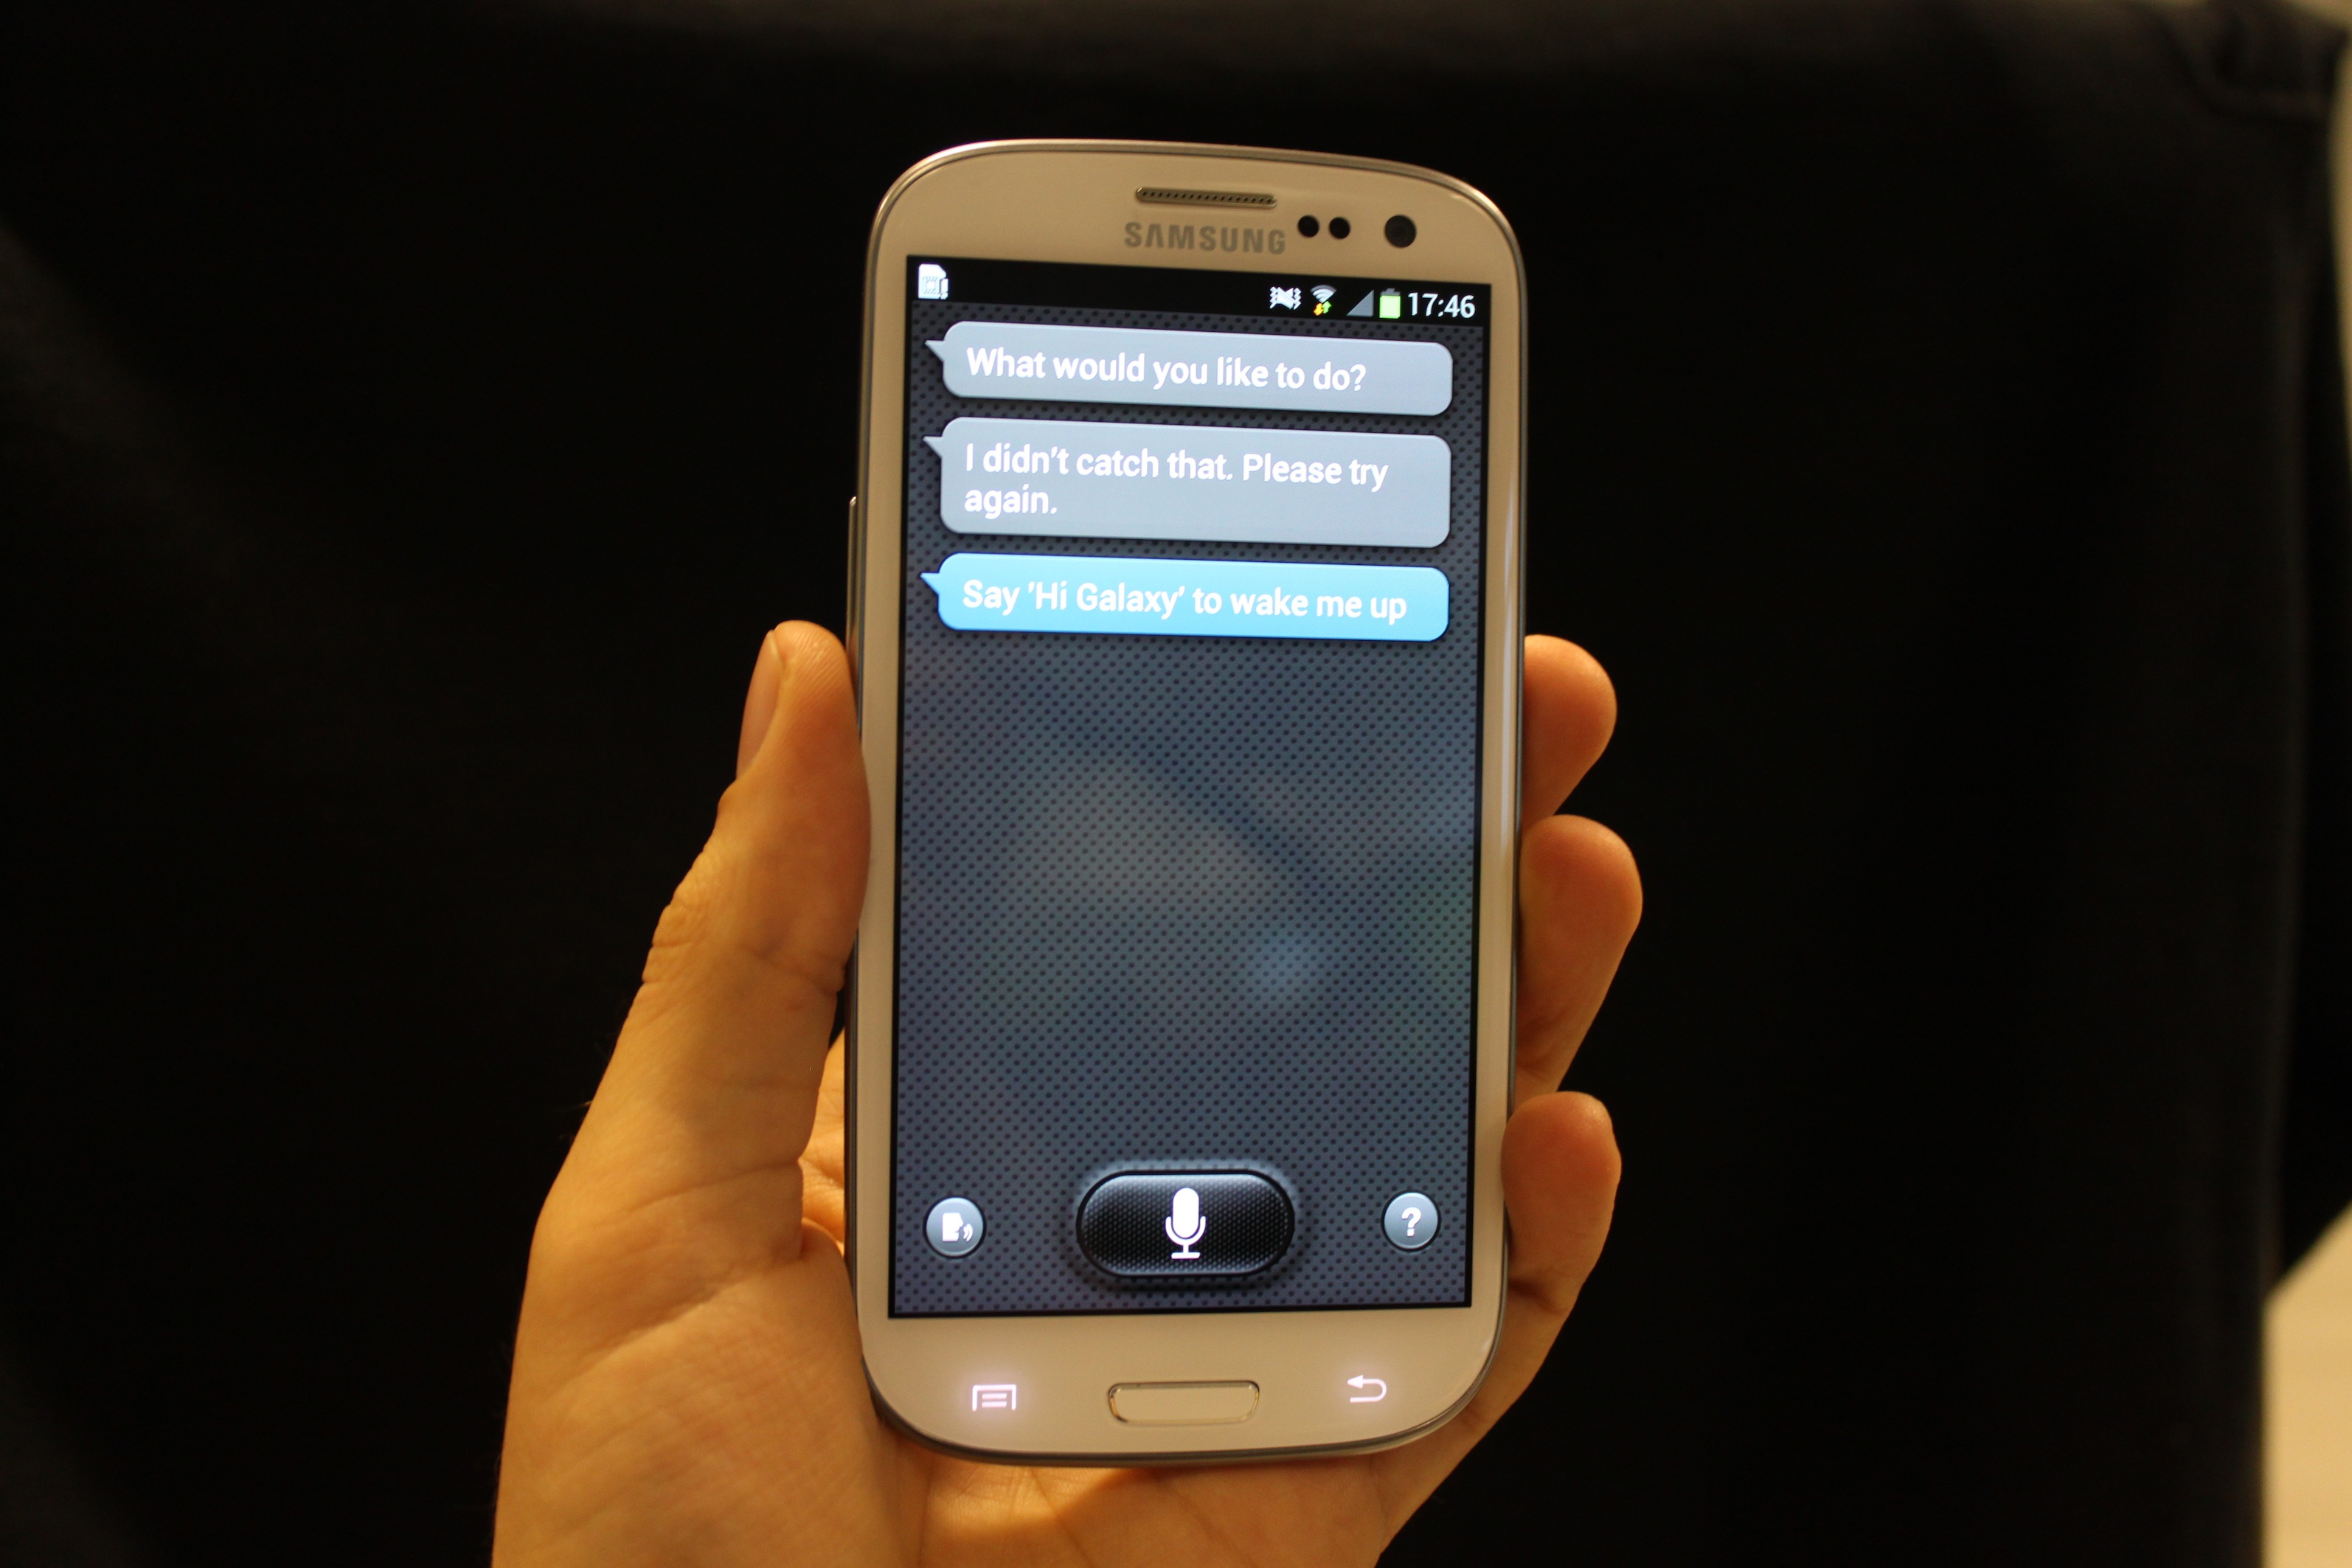 A Guide to Natural Interaction on the Samsung Galaxy SIII